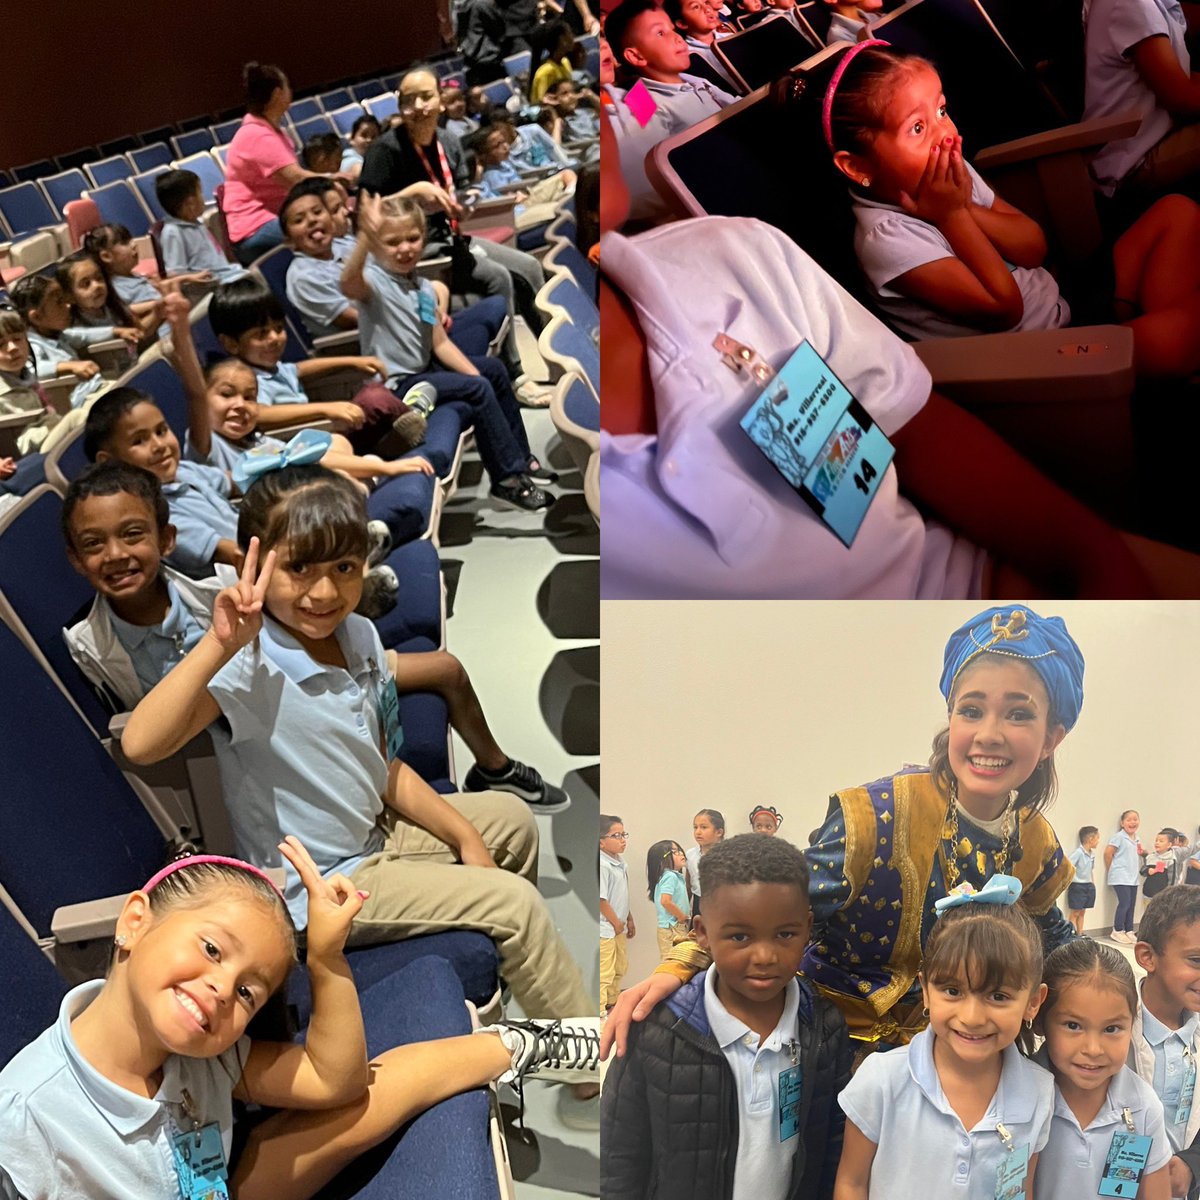 My Pre K Jaguars do find the art in their hearts. Took a field trip to watch Aladdin Jr. You can see the joy in their faces! #findtheartinyourheart #prekrocks #wonderfulexperience @PDN_Academy @MSmith_PDNFAA @lwaters_PDN